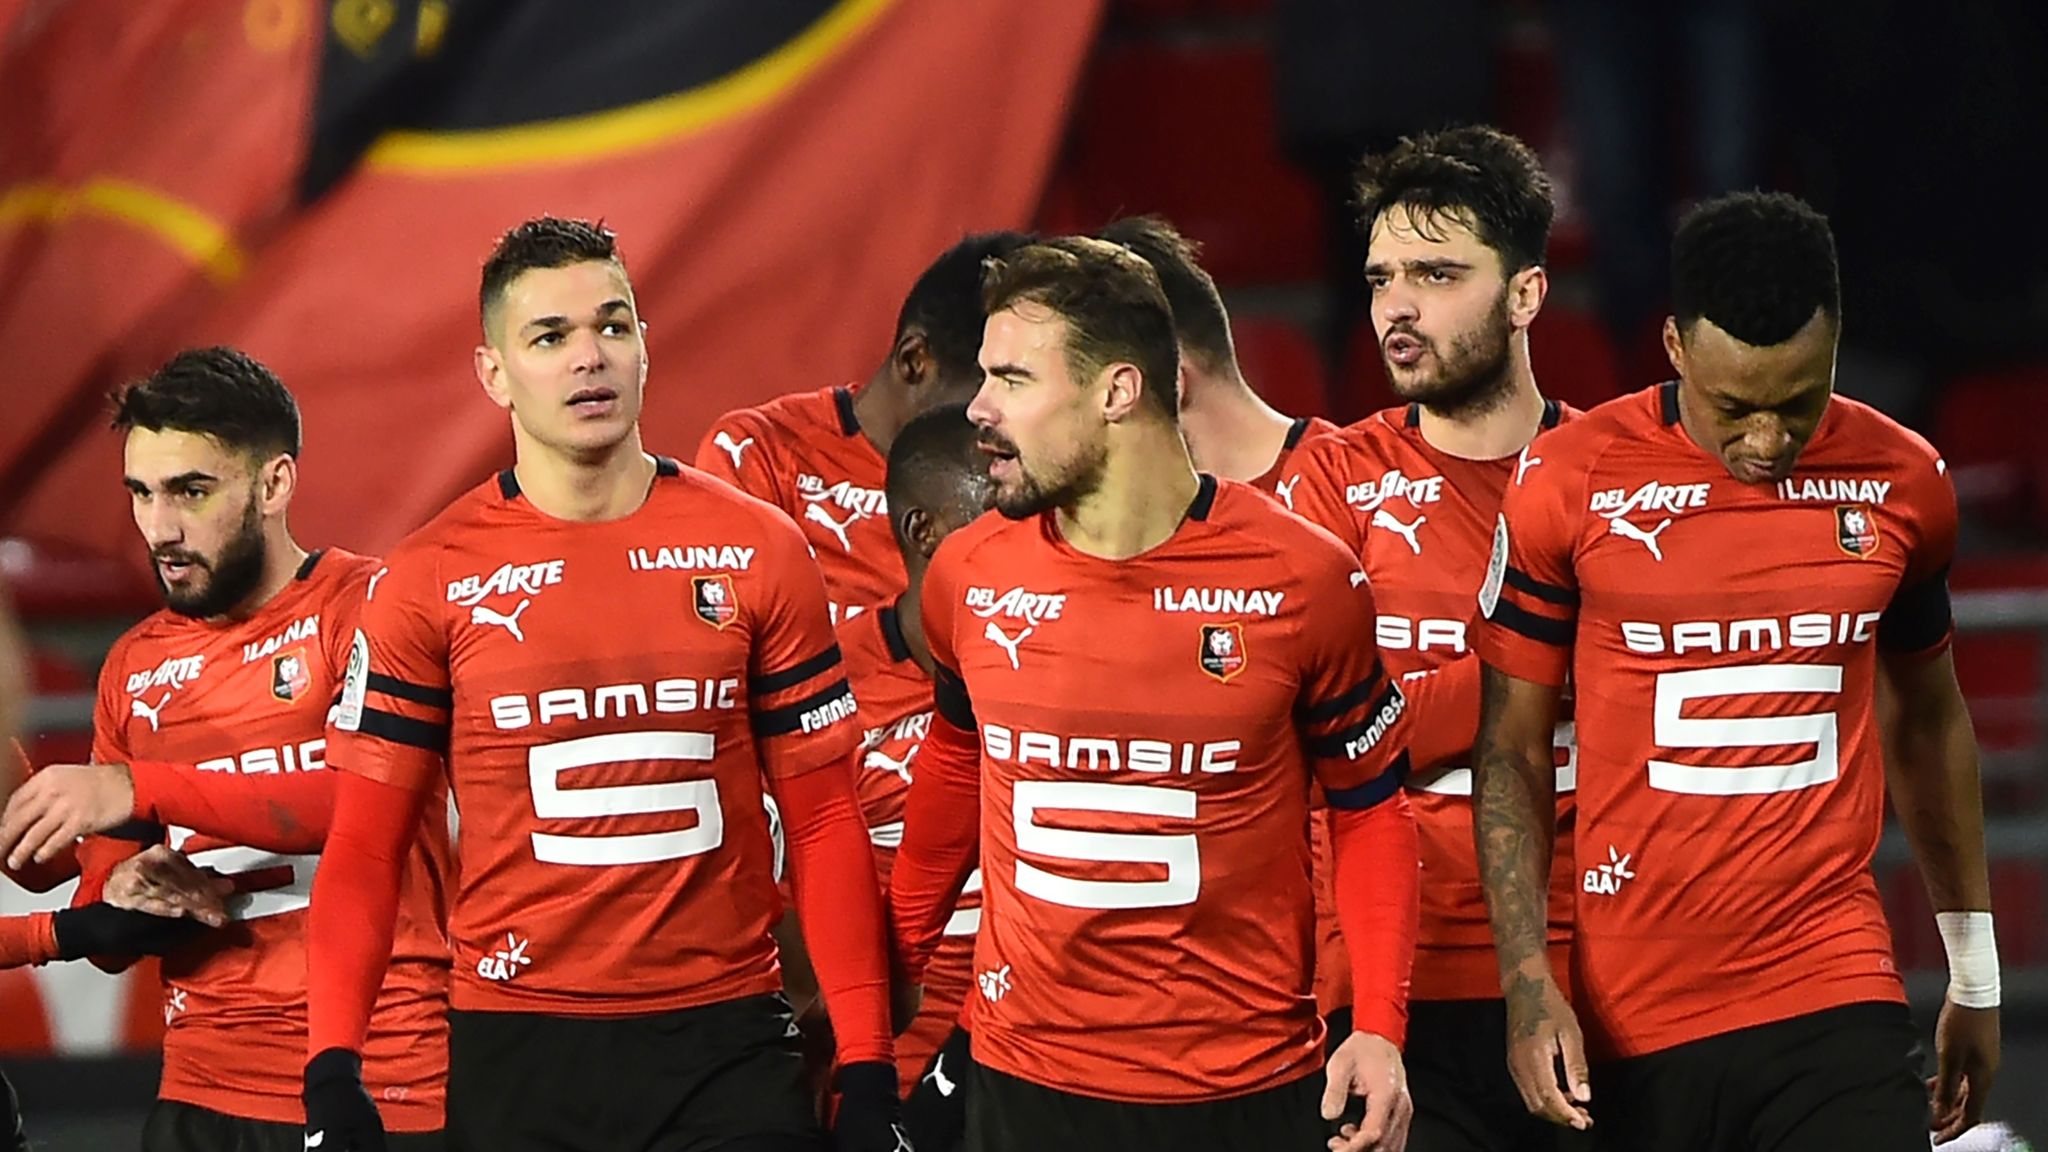 wandelen Onafhankelijk mini Rennes vs Nimes called off as Ligue 1 give club extra time to prepare for  Arsenal in Europa League | Football News | Sky Sports